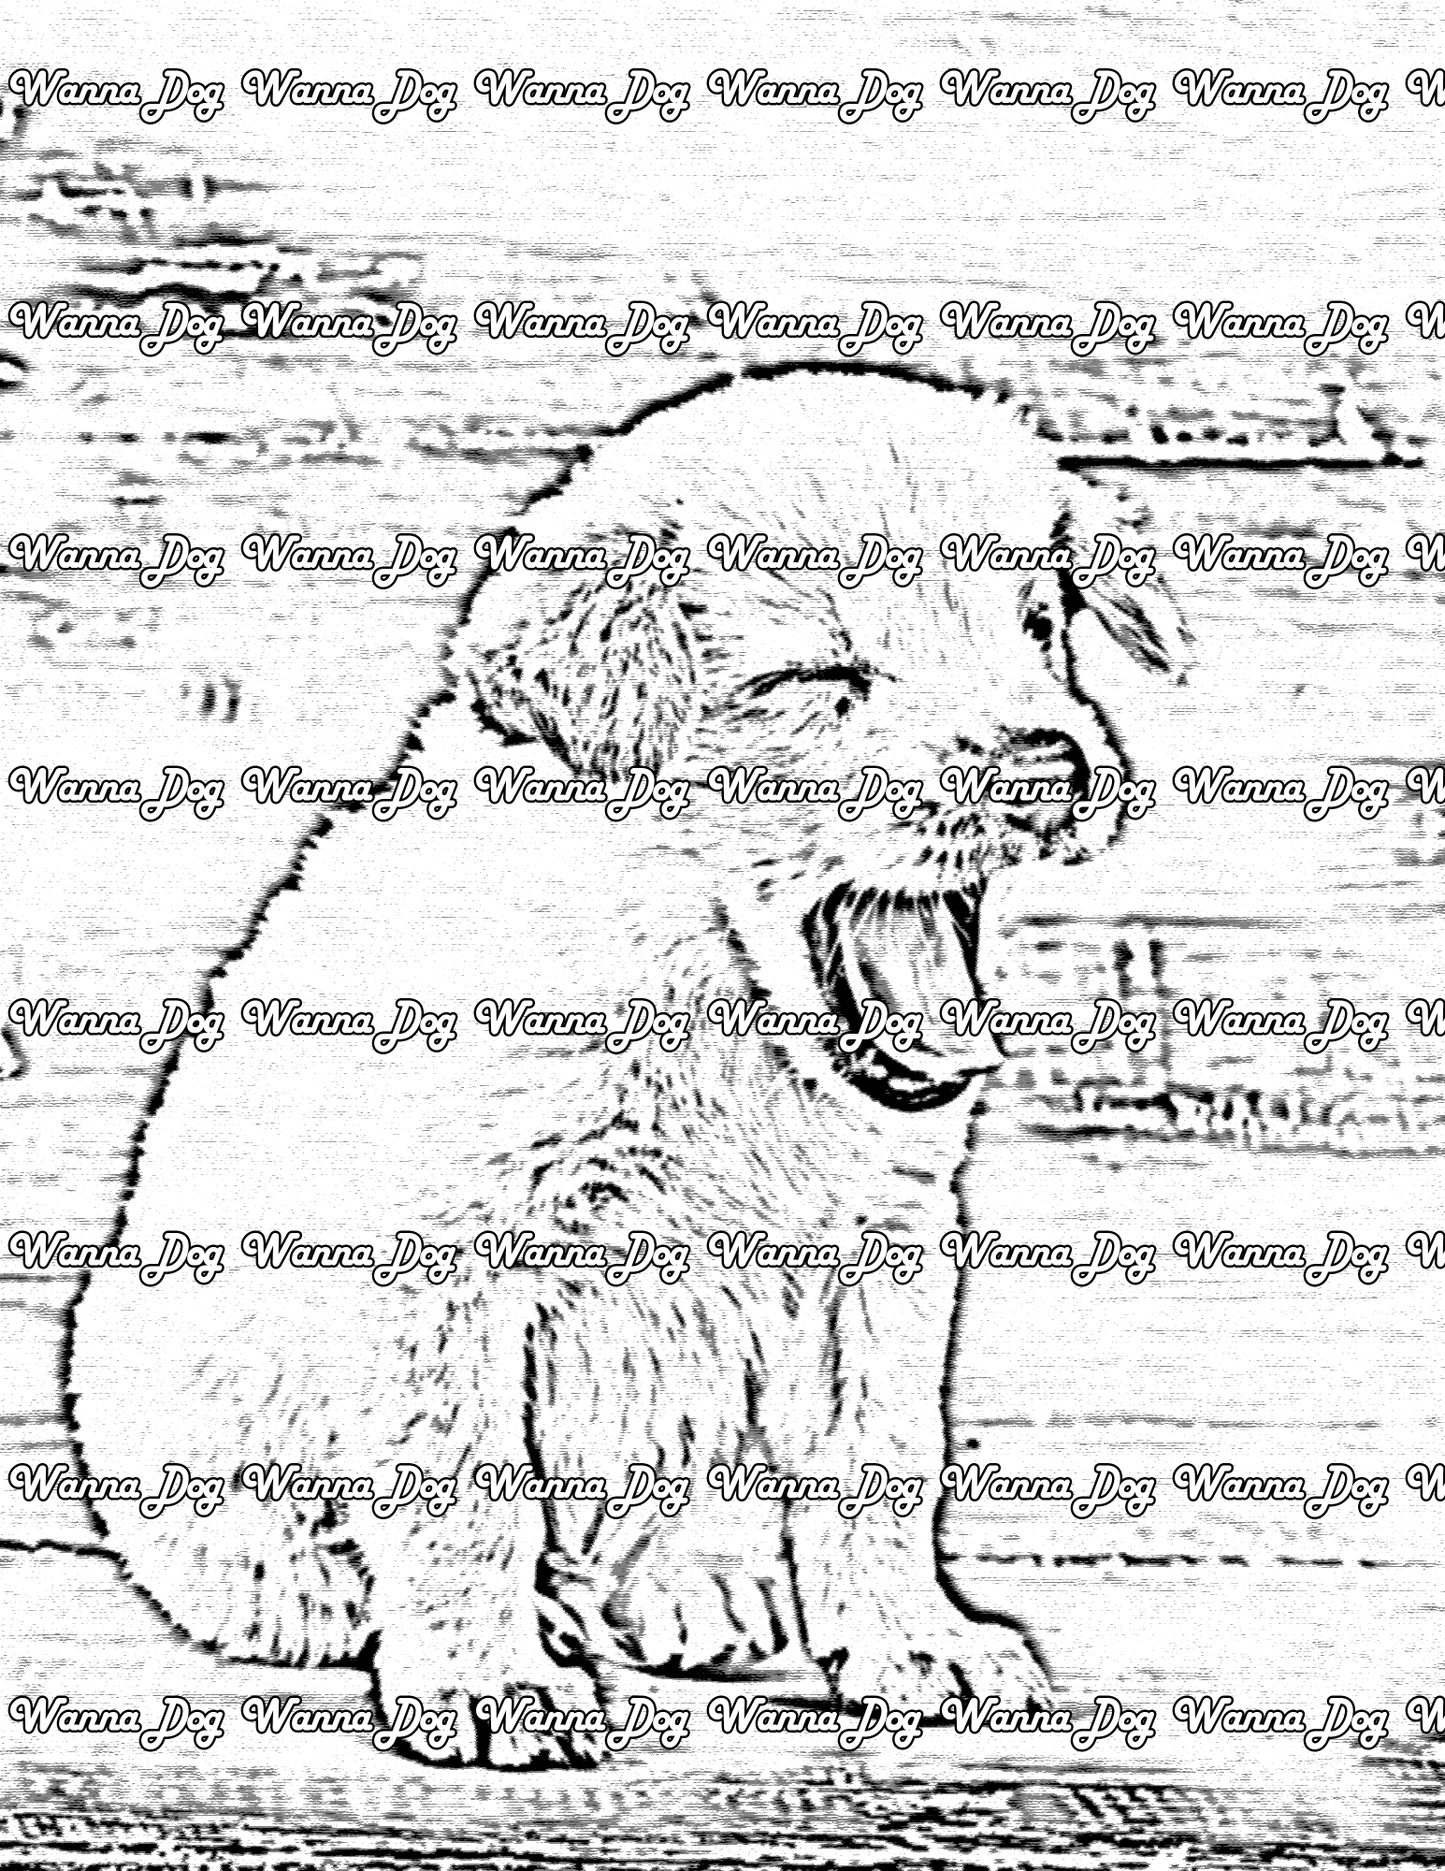 Lab Puppy Coloring Page of a Lab Puppy yawning